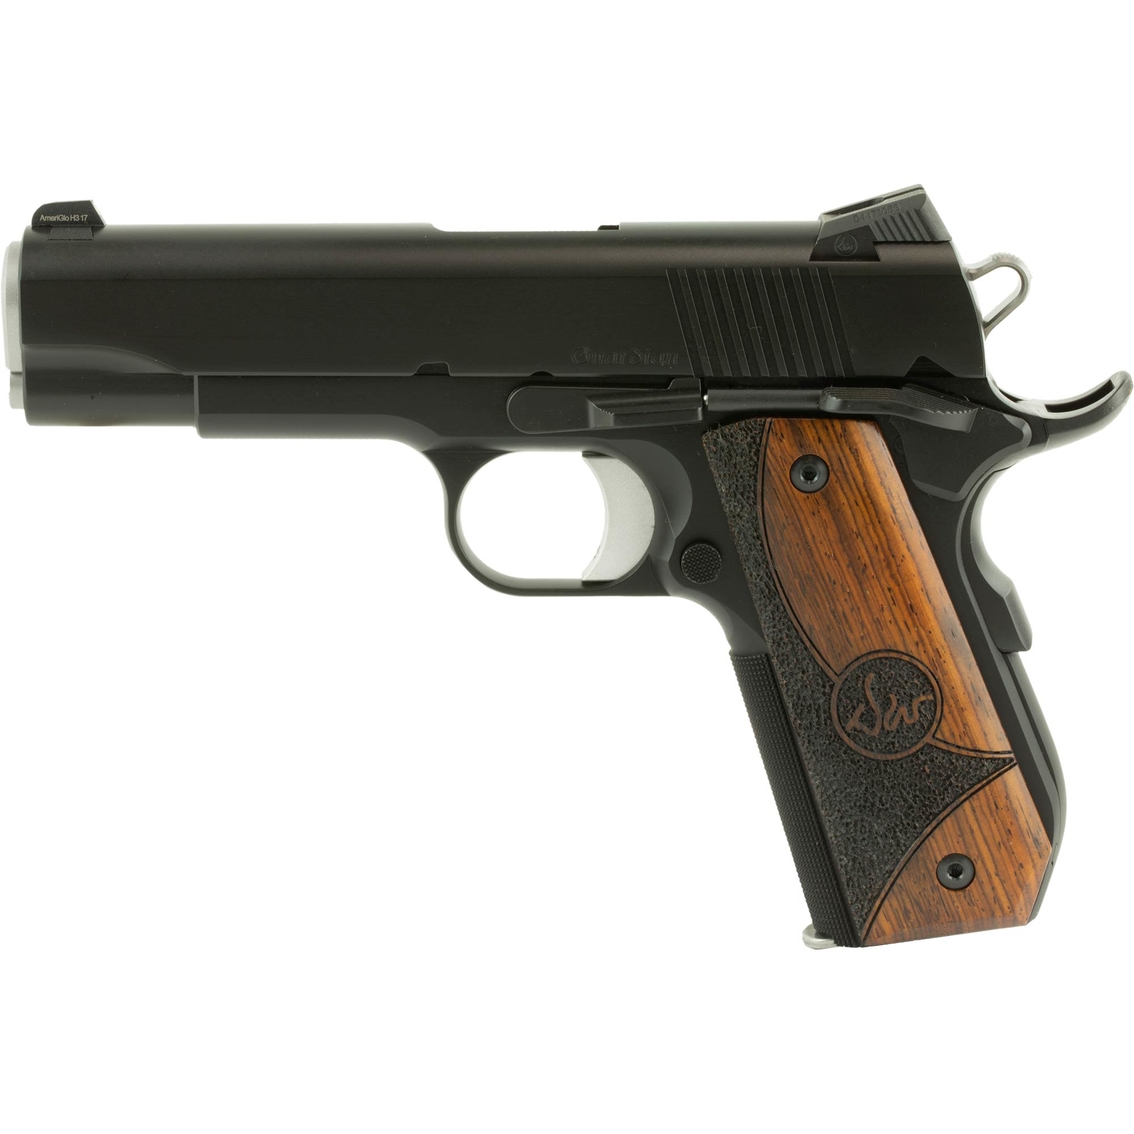 Dan Wesson Guardian Bobtail 38 Super 4.25 in. Barrel 9 Rds 2-Mags NS Pistol Black - Image 2 of 3